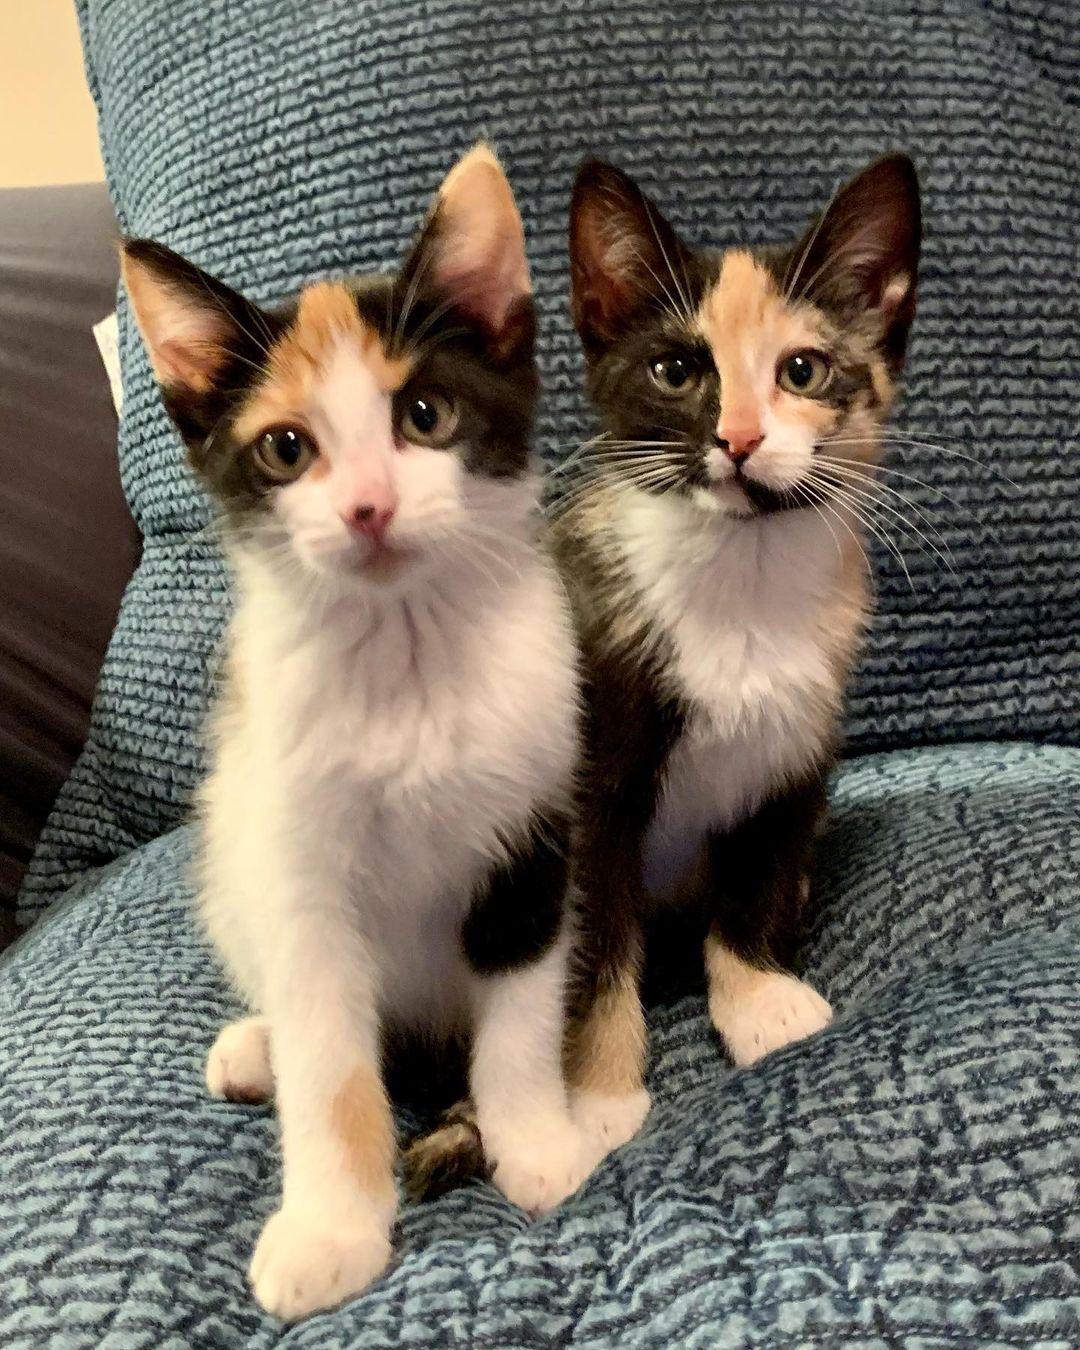 Rory and Rayna and killing us with how adorable they are… SERIOUSLY girls?!?!? Totally adorable! They’re also sweet, cuddly, and outgoing to boot!

Approx 10 weeks old and ready to go this Thursday. 

Http://redemptionroadrescue.rescuegroups.org/forms/ 

<a target='_blank' href='https://www.instagram.com/explore/tags/Adoptdontshop/'>#Adoptdontshop</a> <a target='_blank' href='https://www.instagram.com/explore/tags/redemptionroadrescue/'>#redemptionroadrescue</a> <a target='_blank' href='https://www.instagram.com/explore/tags/redemptionroadmn/'>#redemptionroadmn</a> <a target='_blank' href='https://www.instagram.com/explore/tags/kittens/'>#kittens</a> <a target='_blank' href='https://www.instagram.com/explore/tags/kittensofinstagram/'>#kittensofinstagram</a> <a target='_blank' href='https://www.instagram.com/explore/tags/minneapoliskitty/'>#minneapoliskitty</a> <a target='_blank' href='https://www.instagram.com/explore/tags/rescuedismyfavoritebreed/'>#rescuedismyfavoritebreed</a> <a target='_blank' href='https://www.instagram.com/explore/tags/minnesotakittens/'>#minnesotakittens</a> <a target='_blank' href='https://www.instagram.com/explore/tags/rescuekitten/'>#rescuekitten</a> <a target='_blank' href='https://www.instagram.com/explore/tags/adoptedkitten/'>#adoptedkitten</a> <a target='_blank' href='https://www.instagram.com/explore/tags/calicokitten/'>#calicokitten</a>